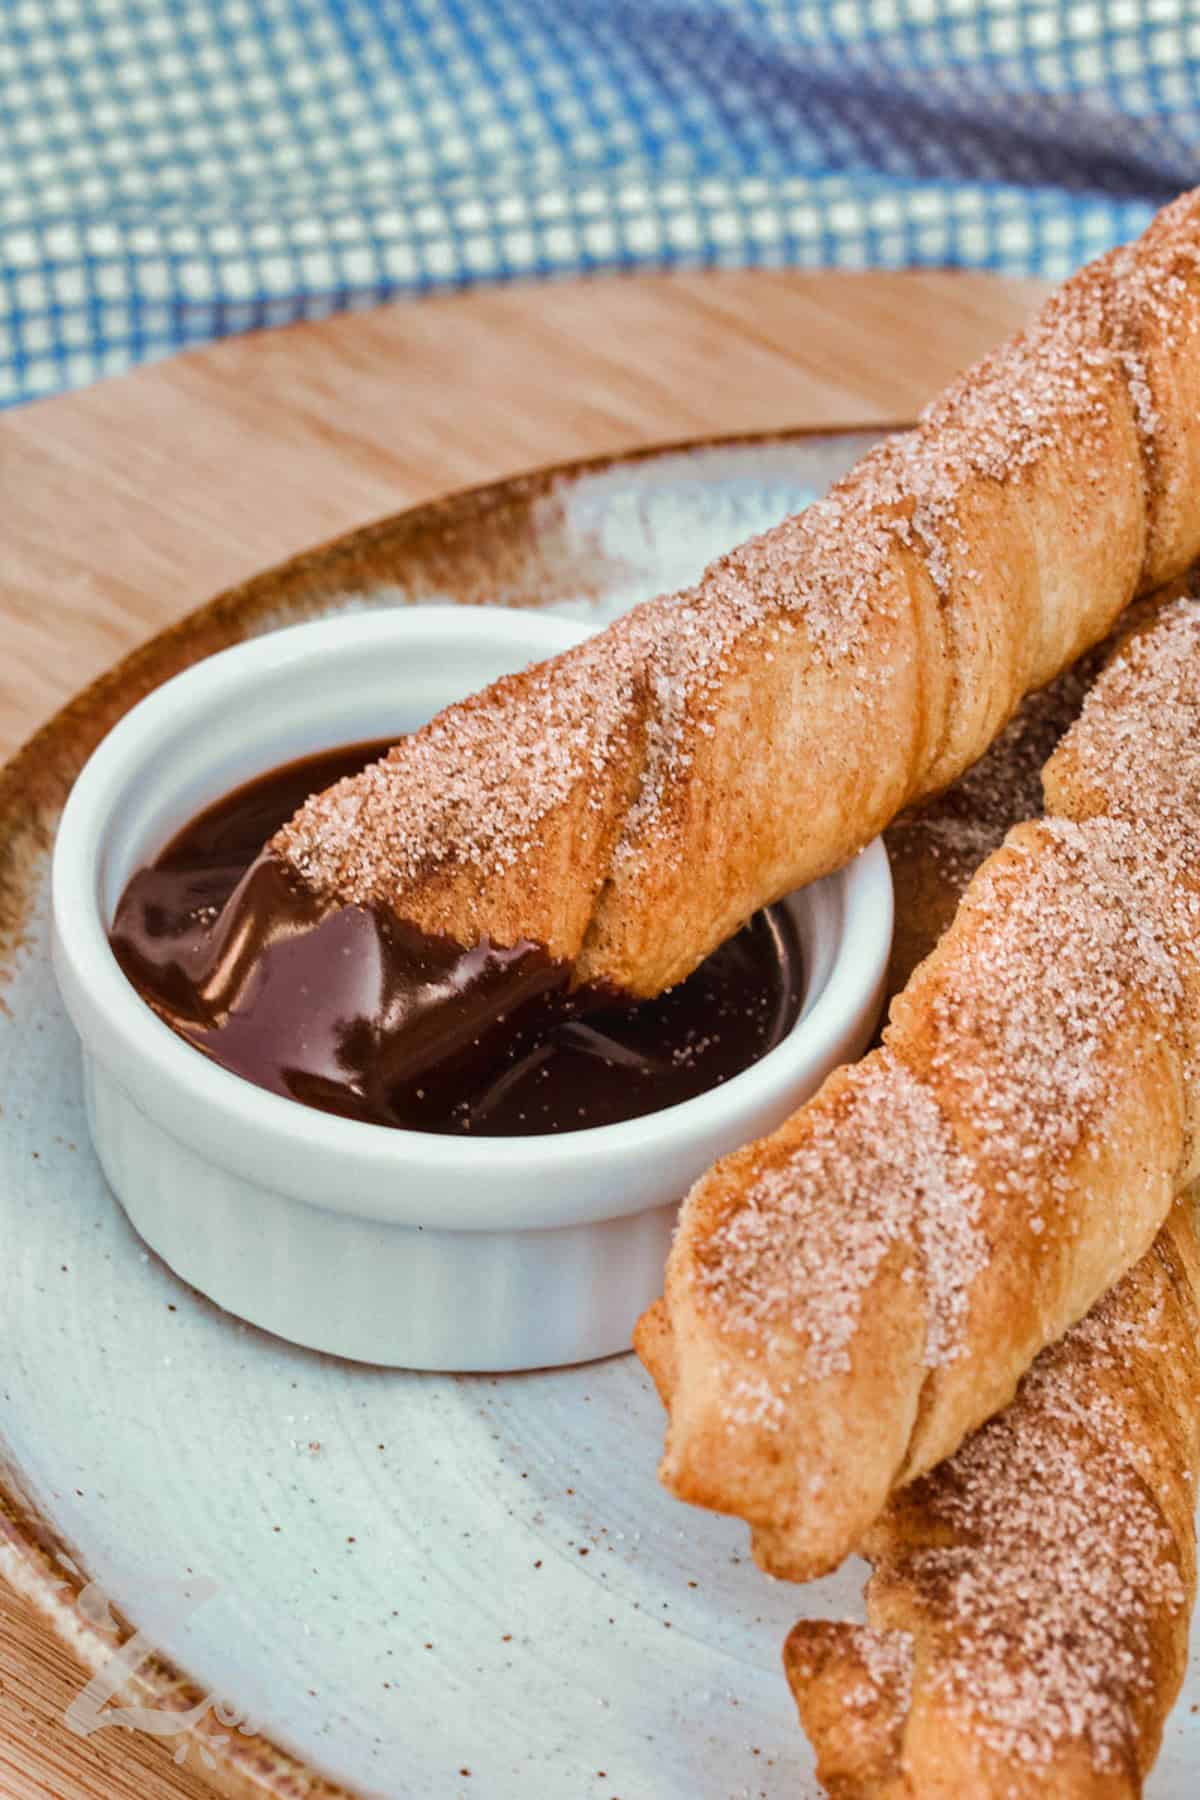 dipped Baked Churros in chocolate sauce